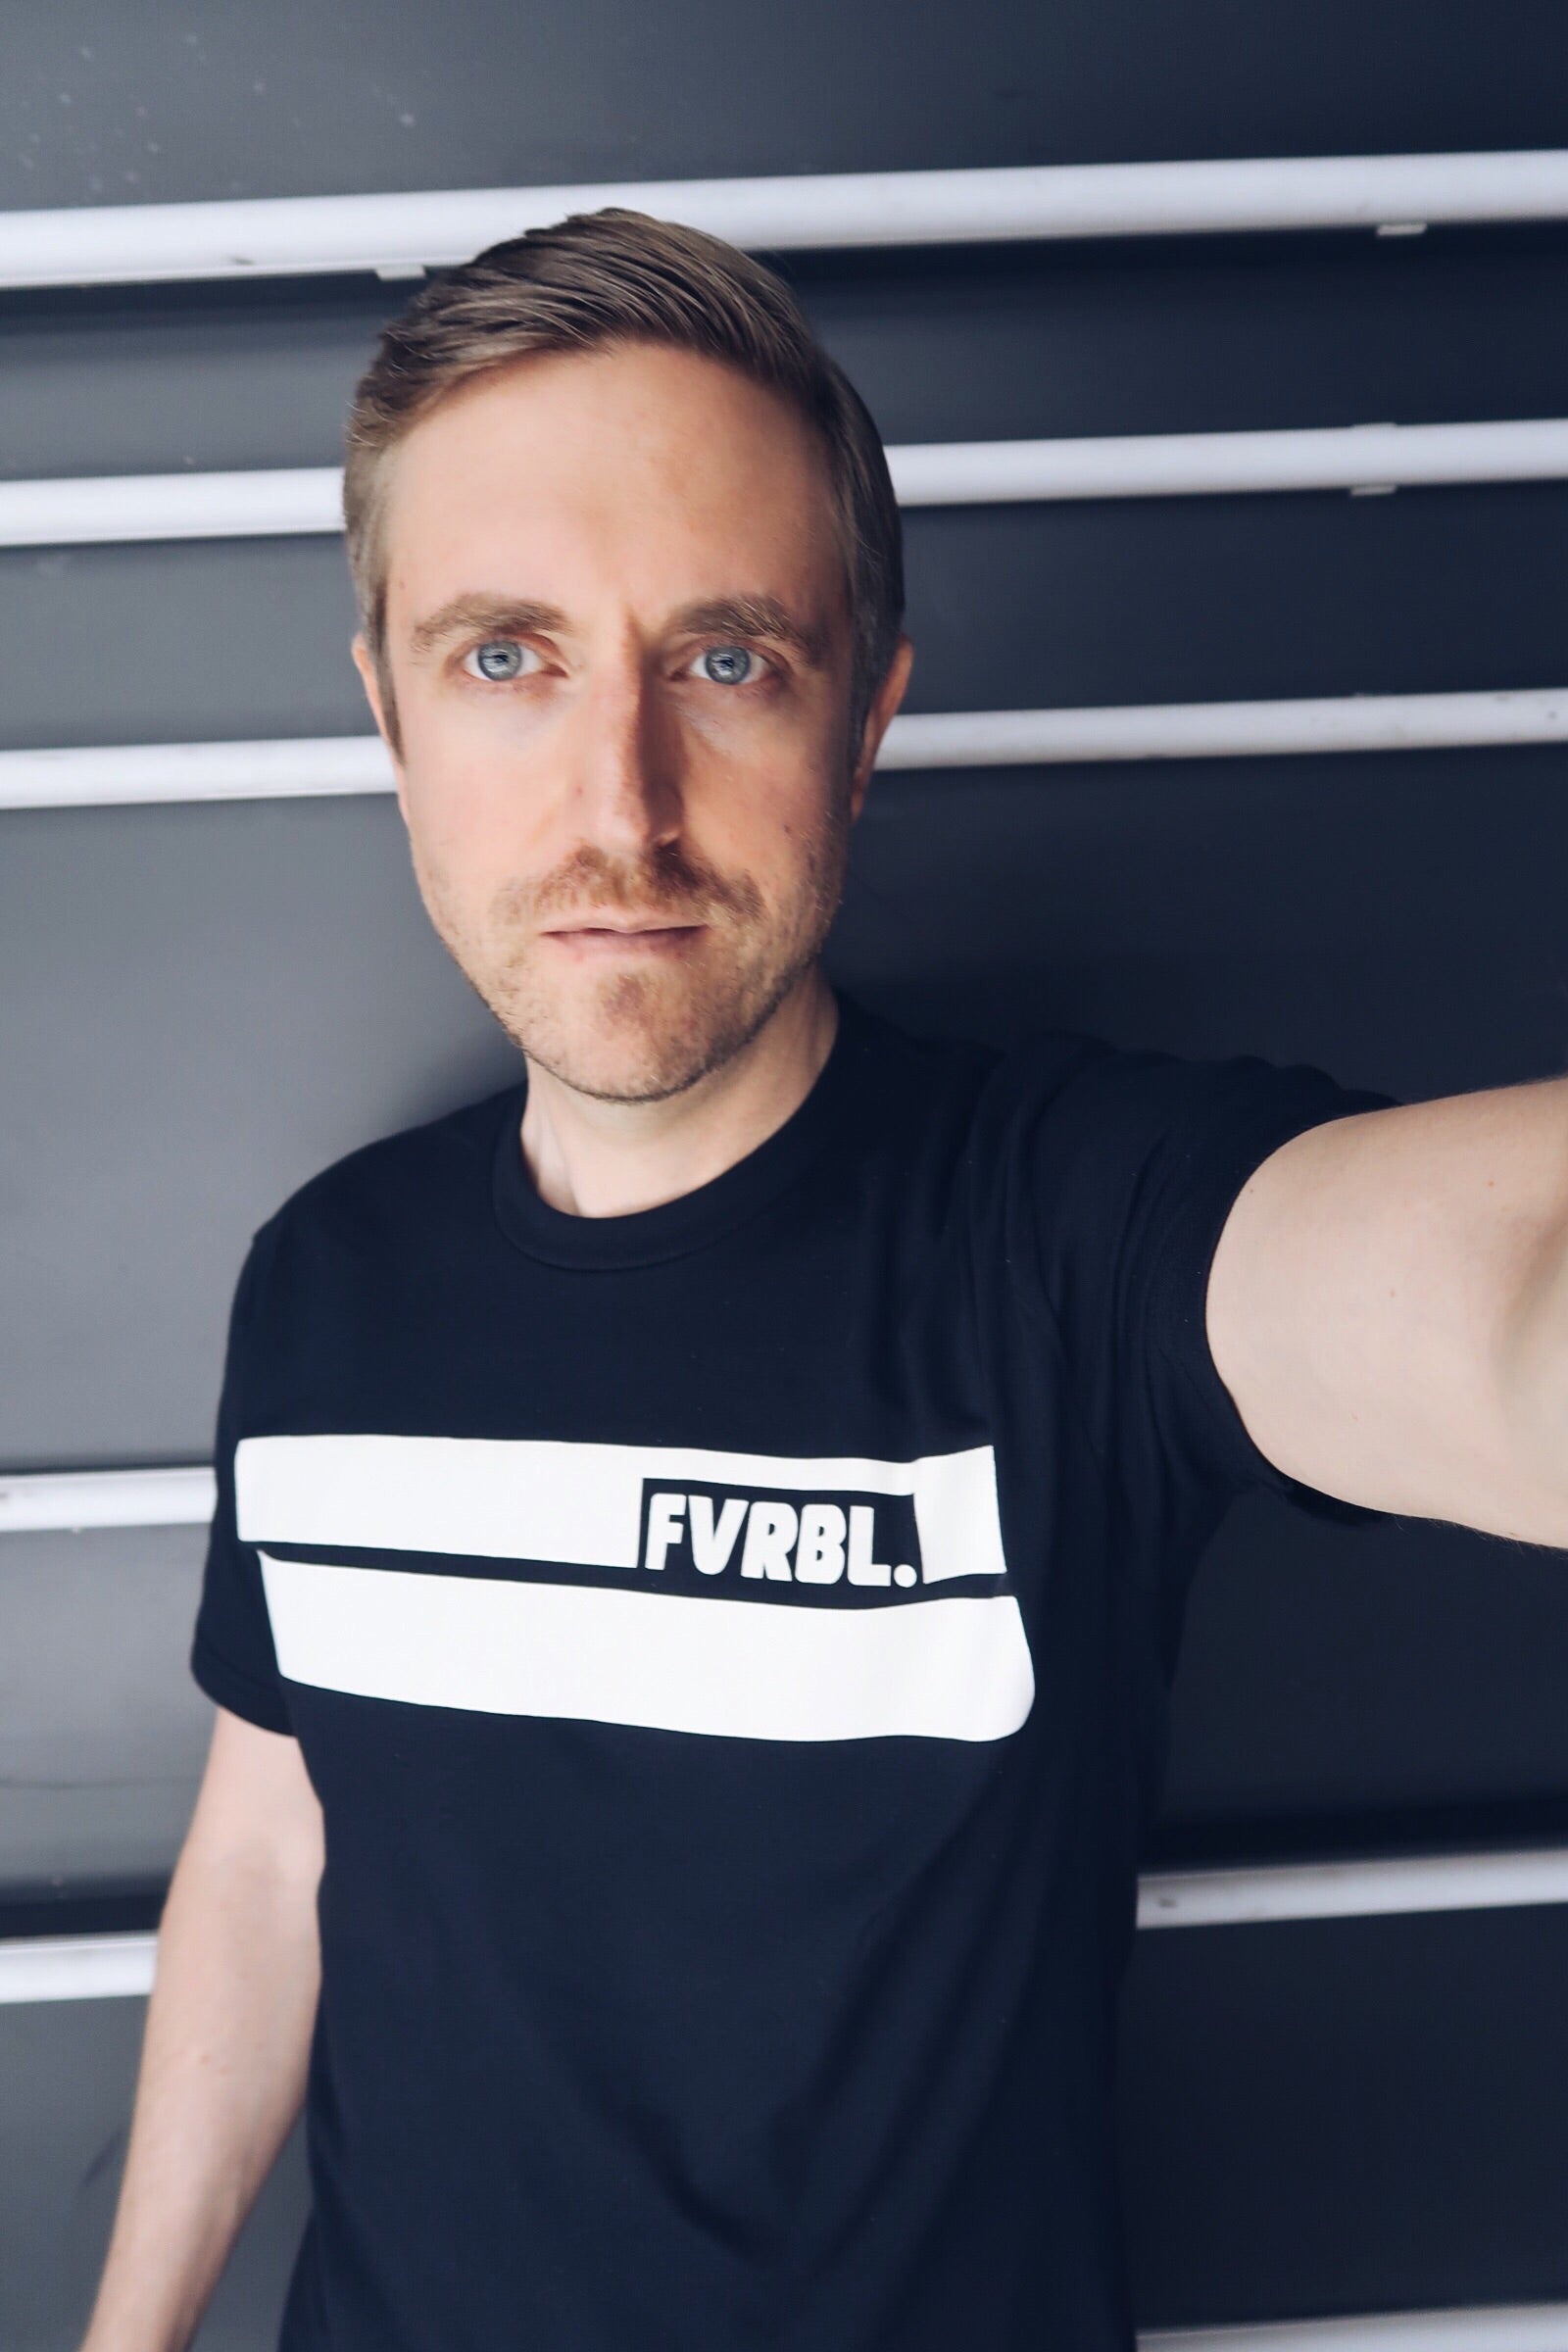 FVRBL. T-SHIRT (archived)